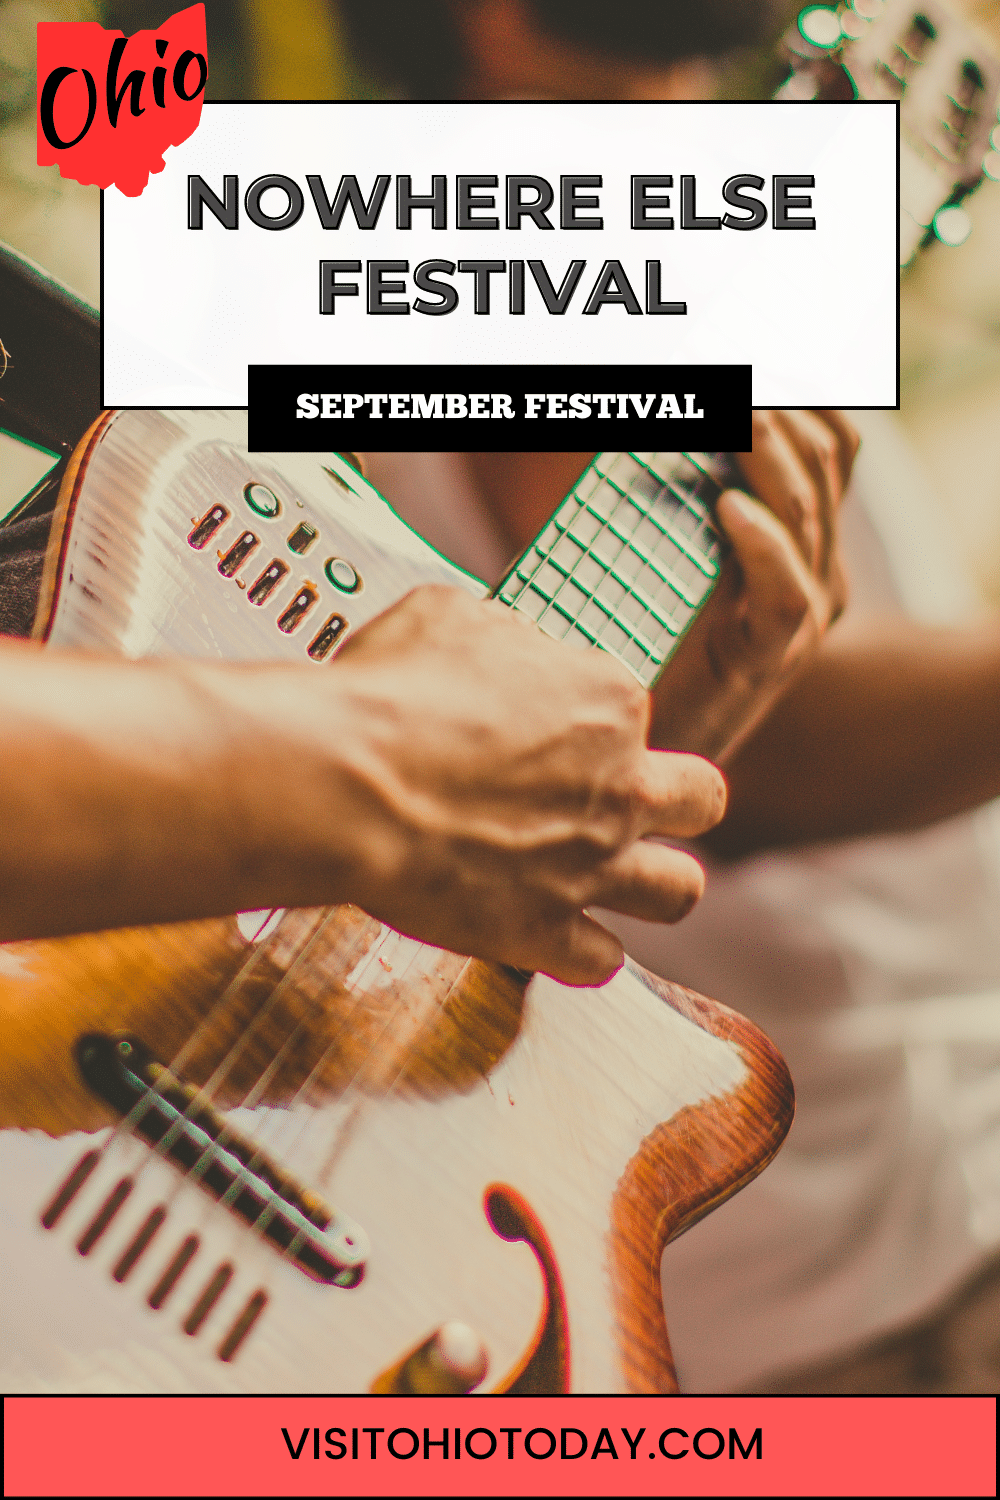 Immerse yourself in the soul-nourishing melodies of The Nowhere Else Festival, a musical celebration set in the rustic charm of an Ohio farm.